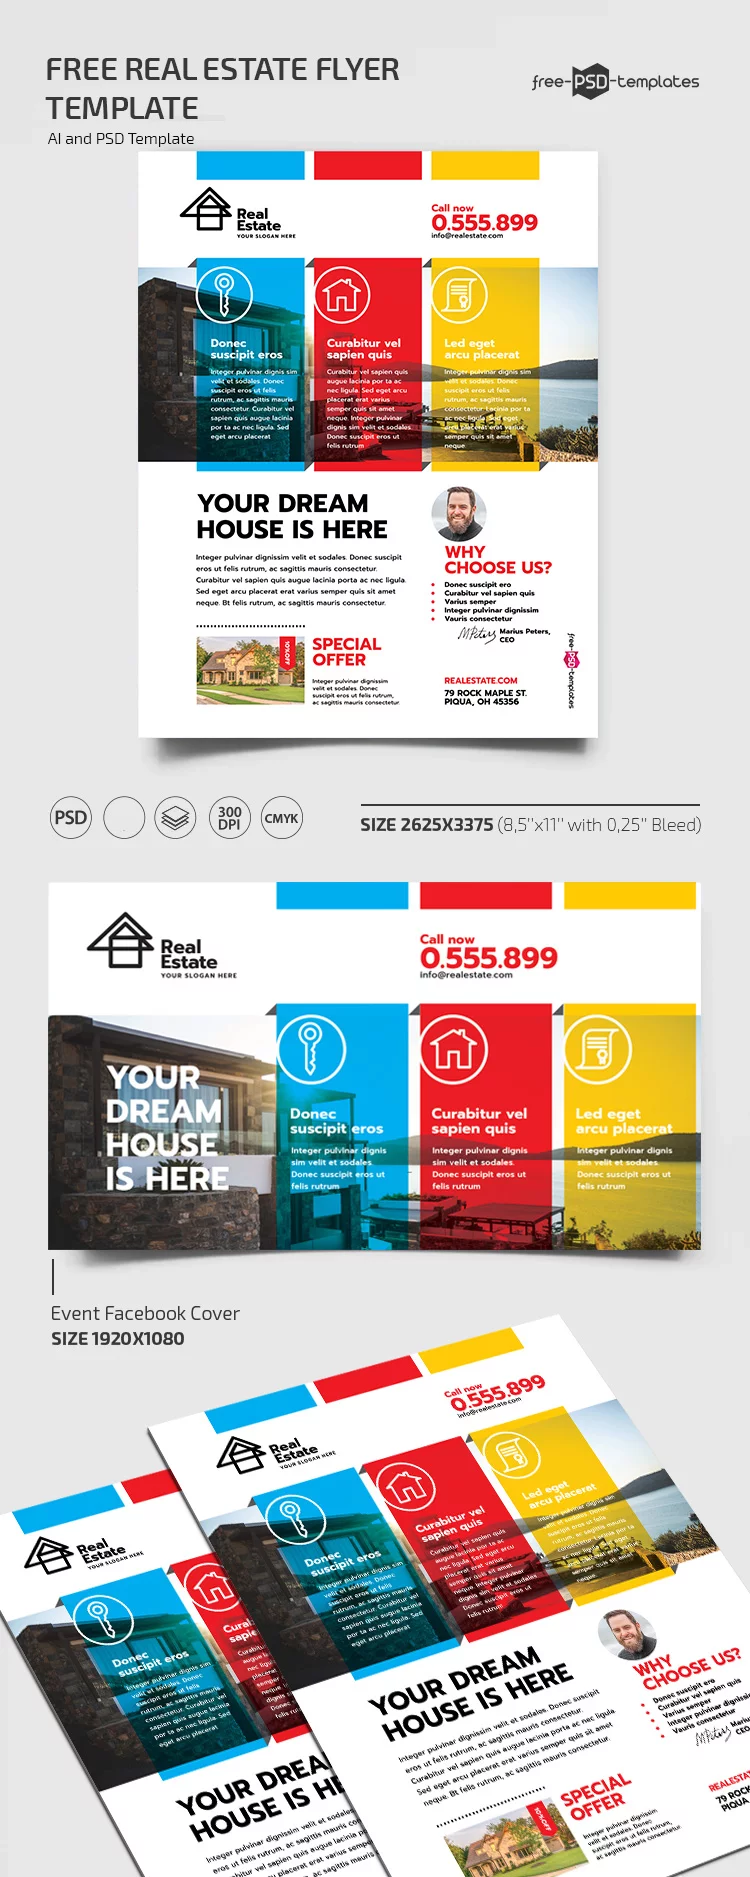 Free Real Estate Flyer Template